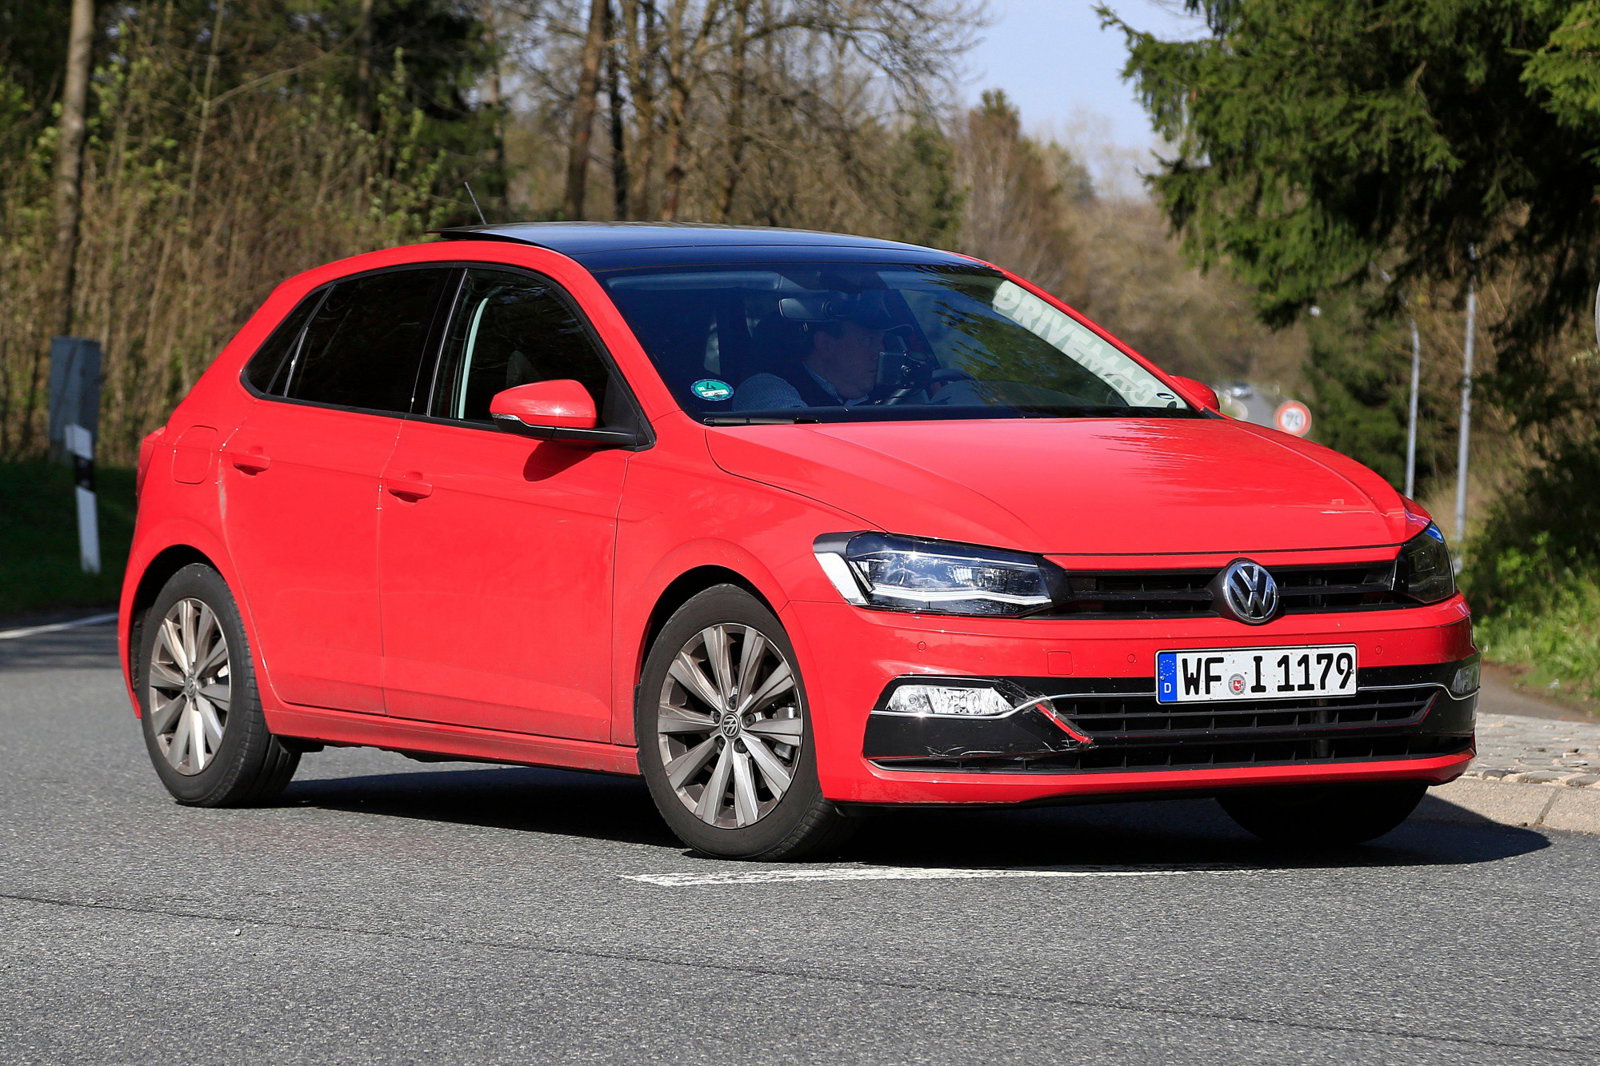 Thinly-disguised next-gen Polo reveals very predictable styling | DriveMag Cars